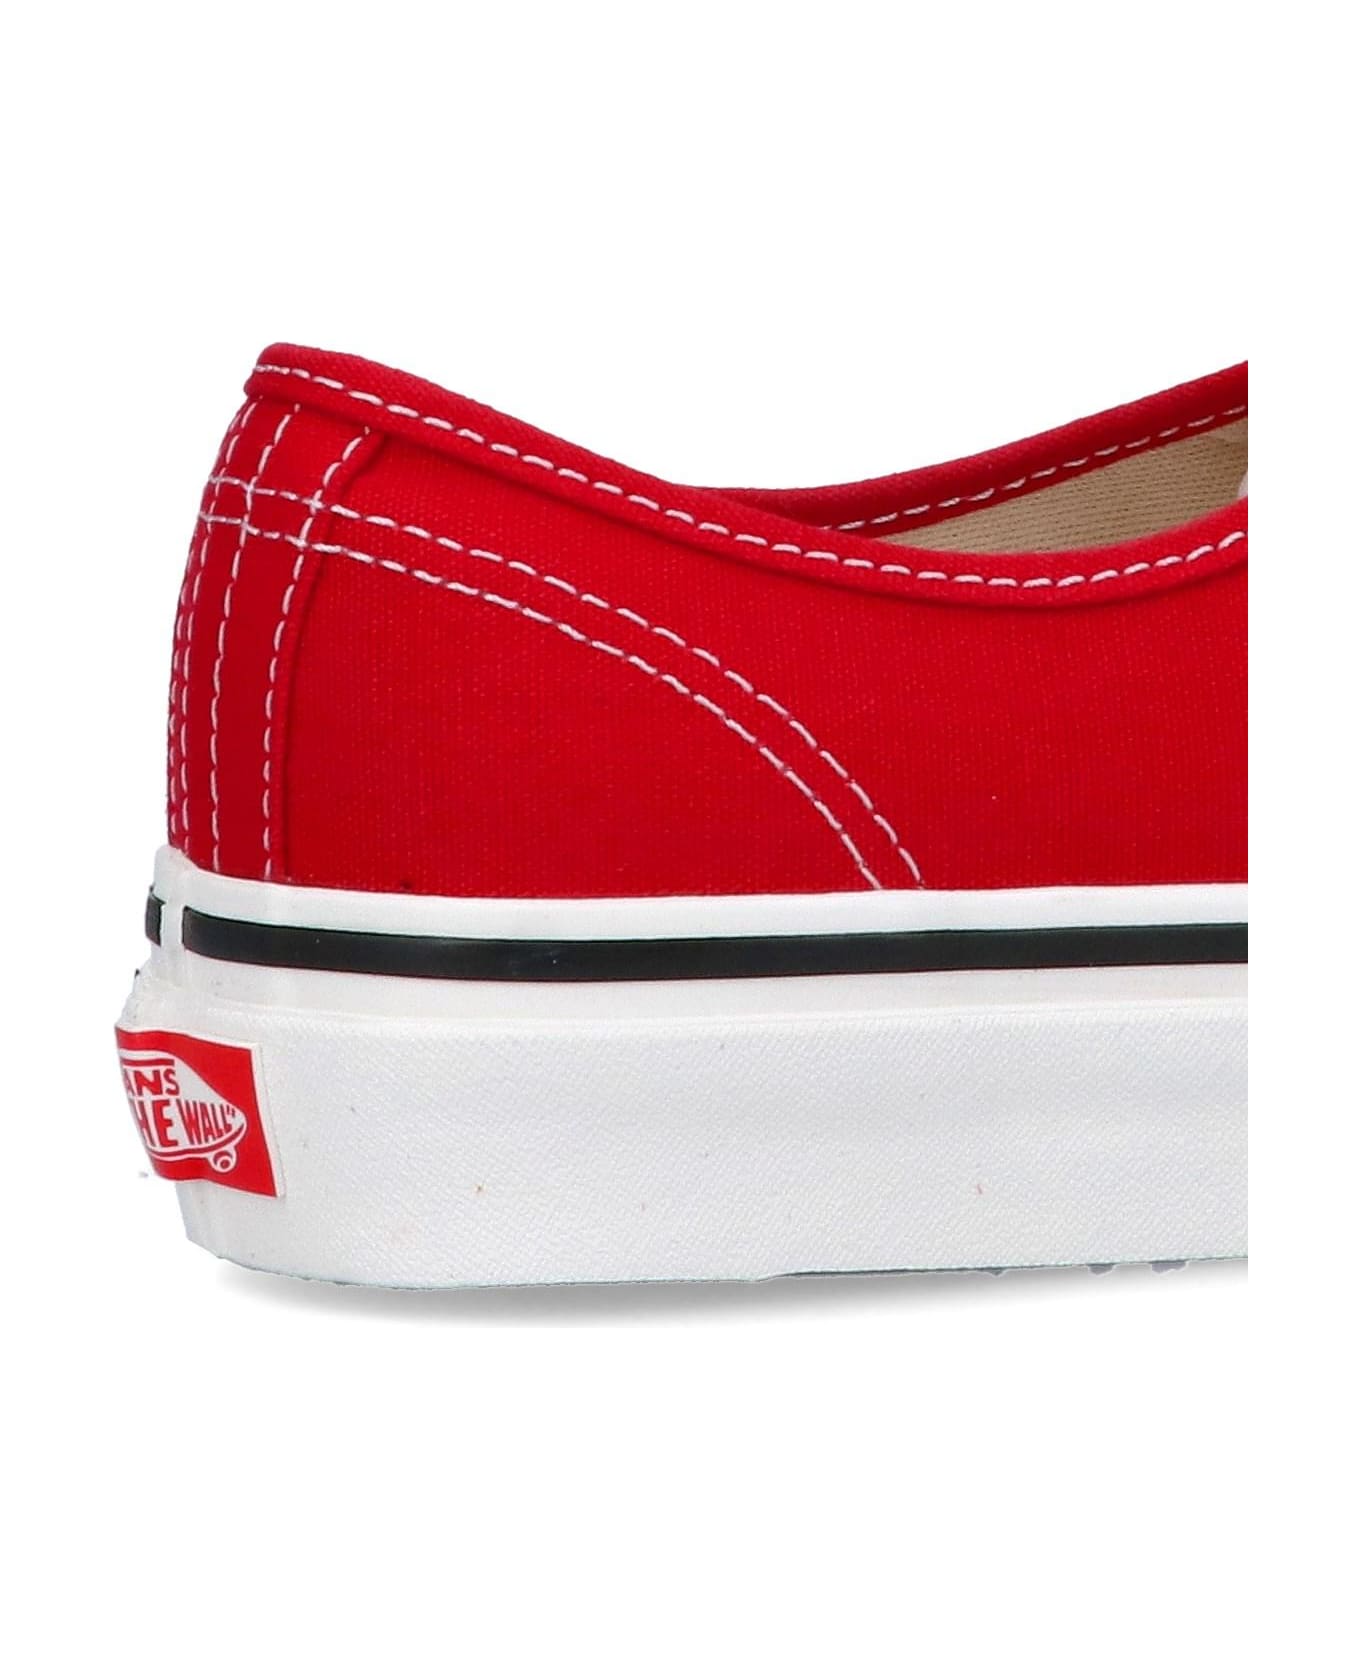 Vans 'anaheim Factory Authentic 44 Dx' Sneakers - RED